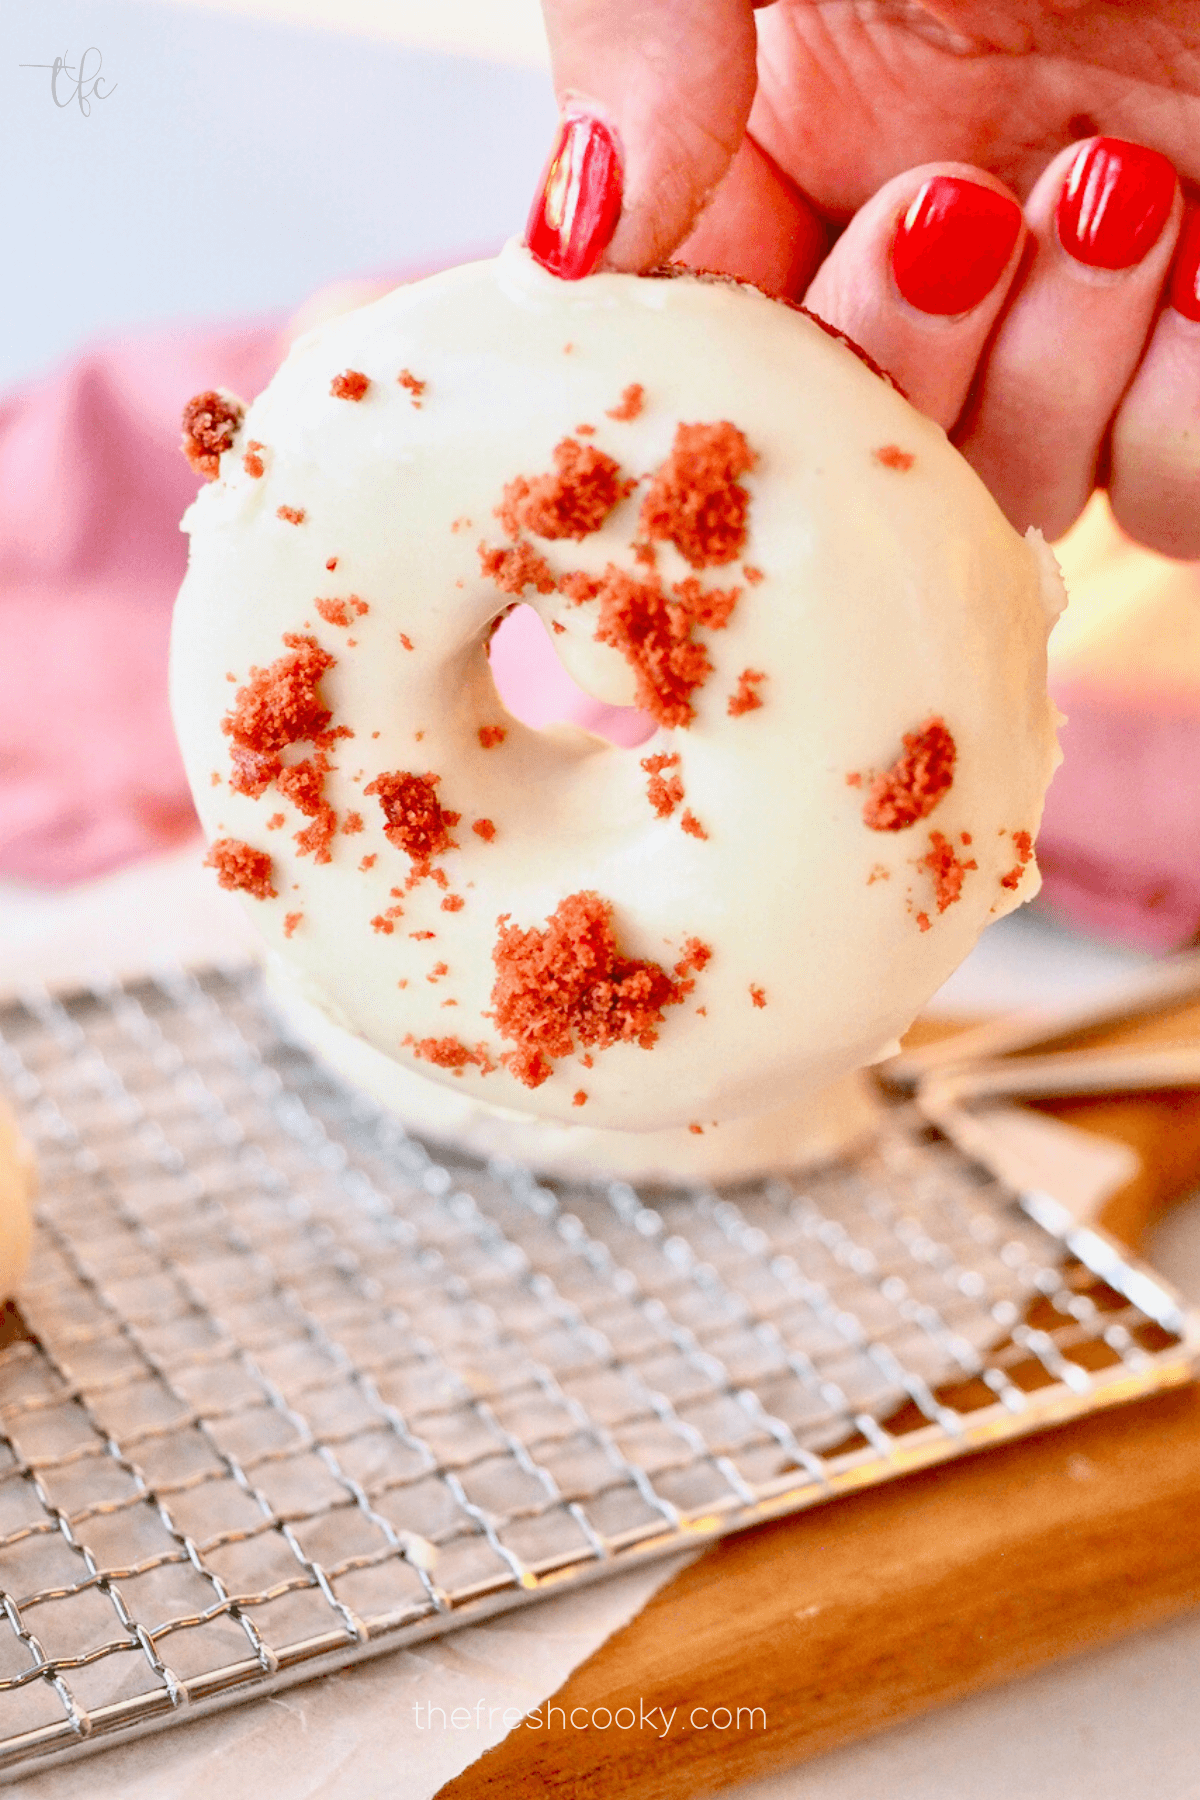 Red Velvet Donut being held in hand with delicious cream cheese glaze.